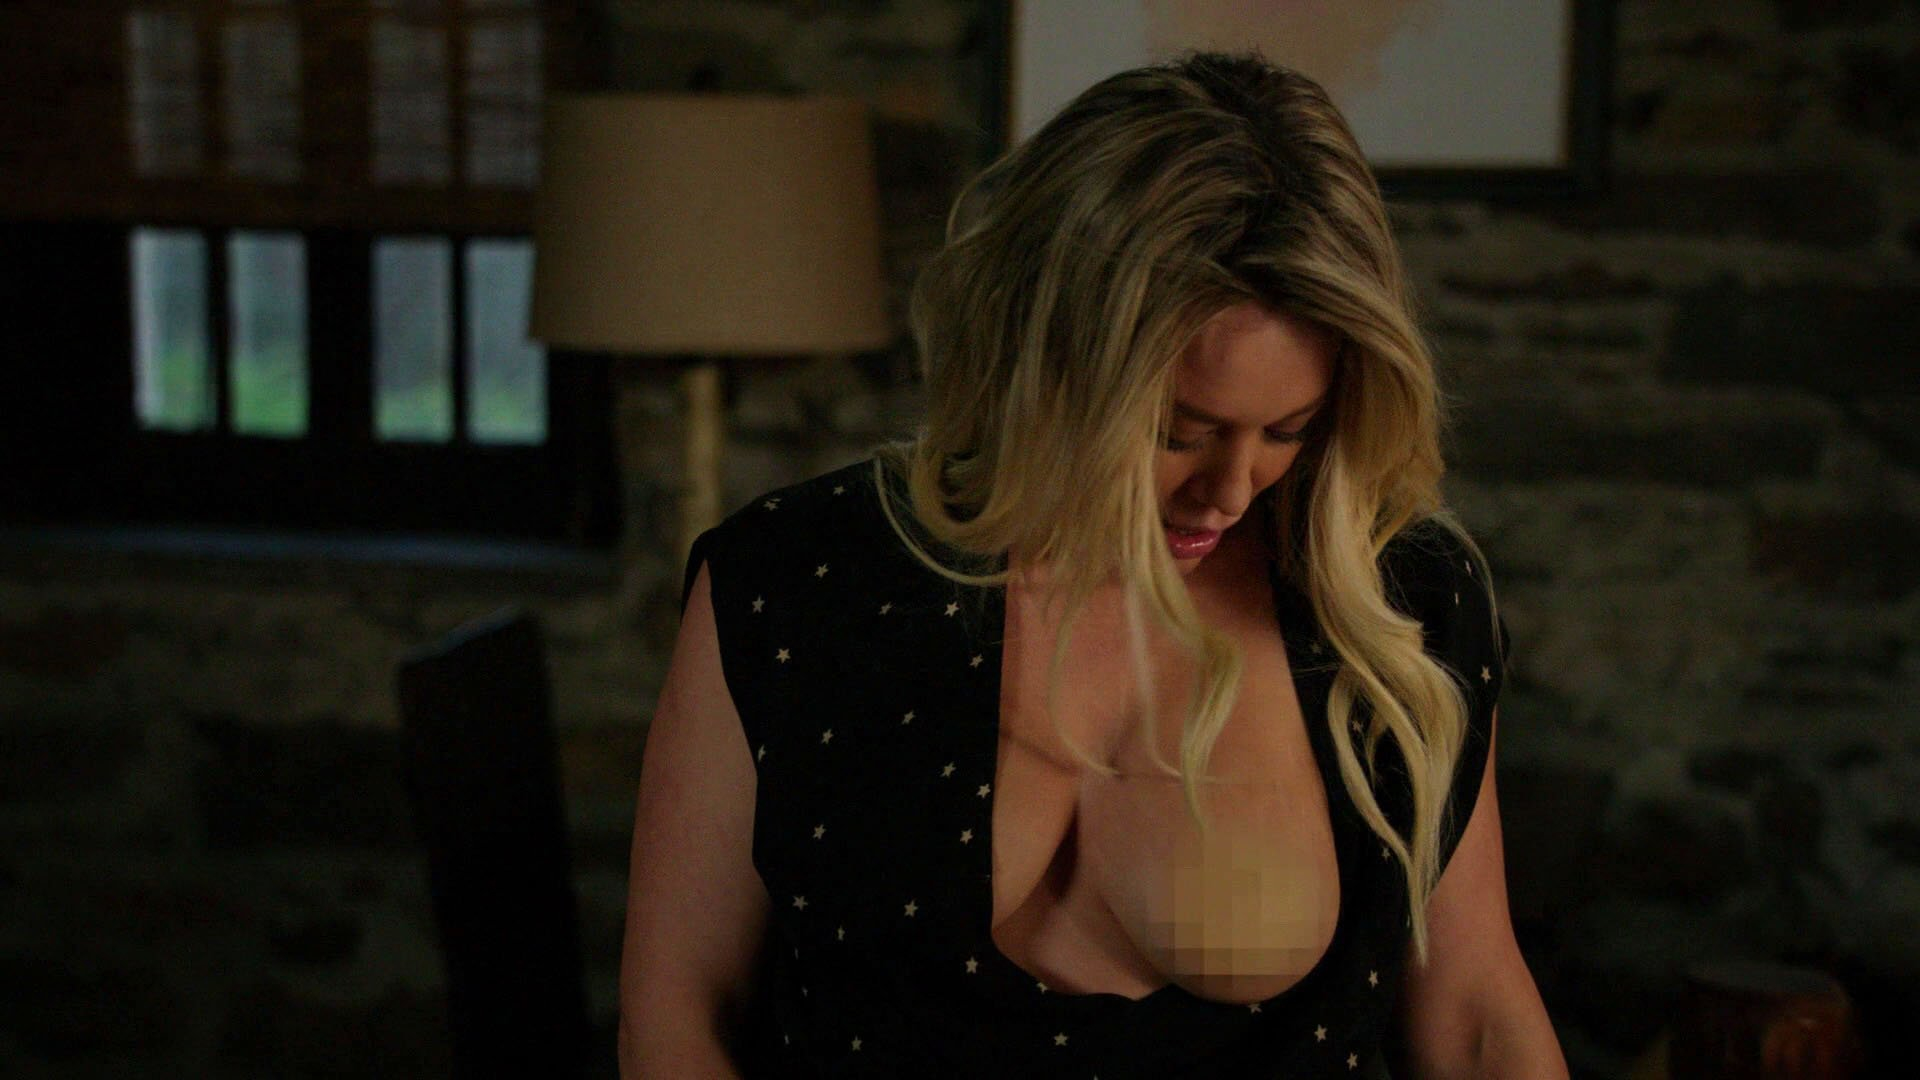 Hilary duff tits out